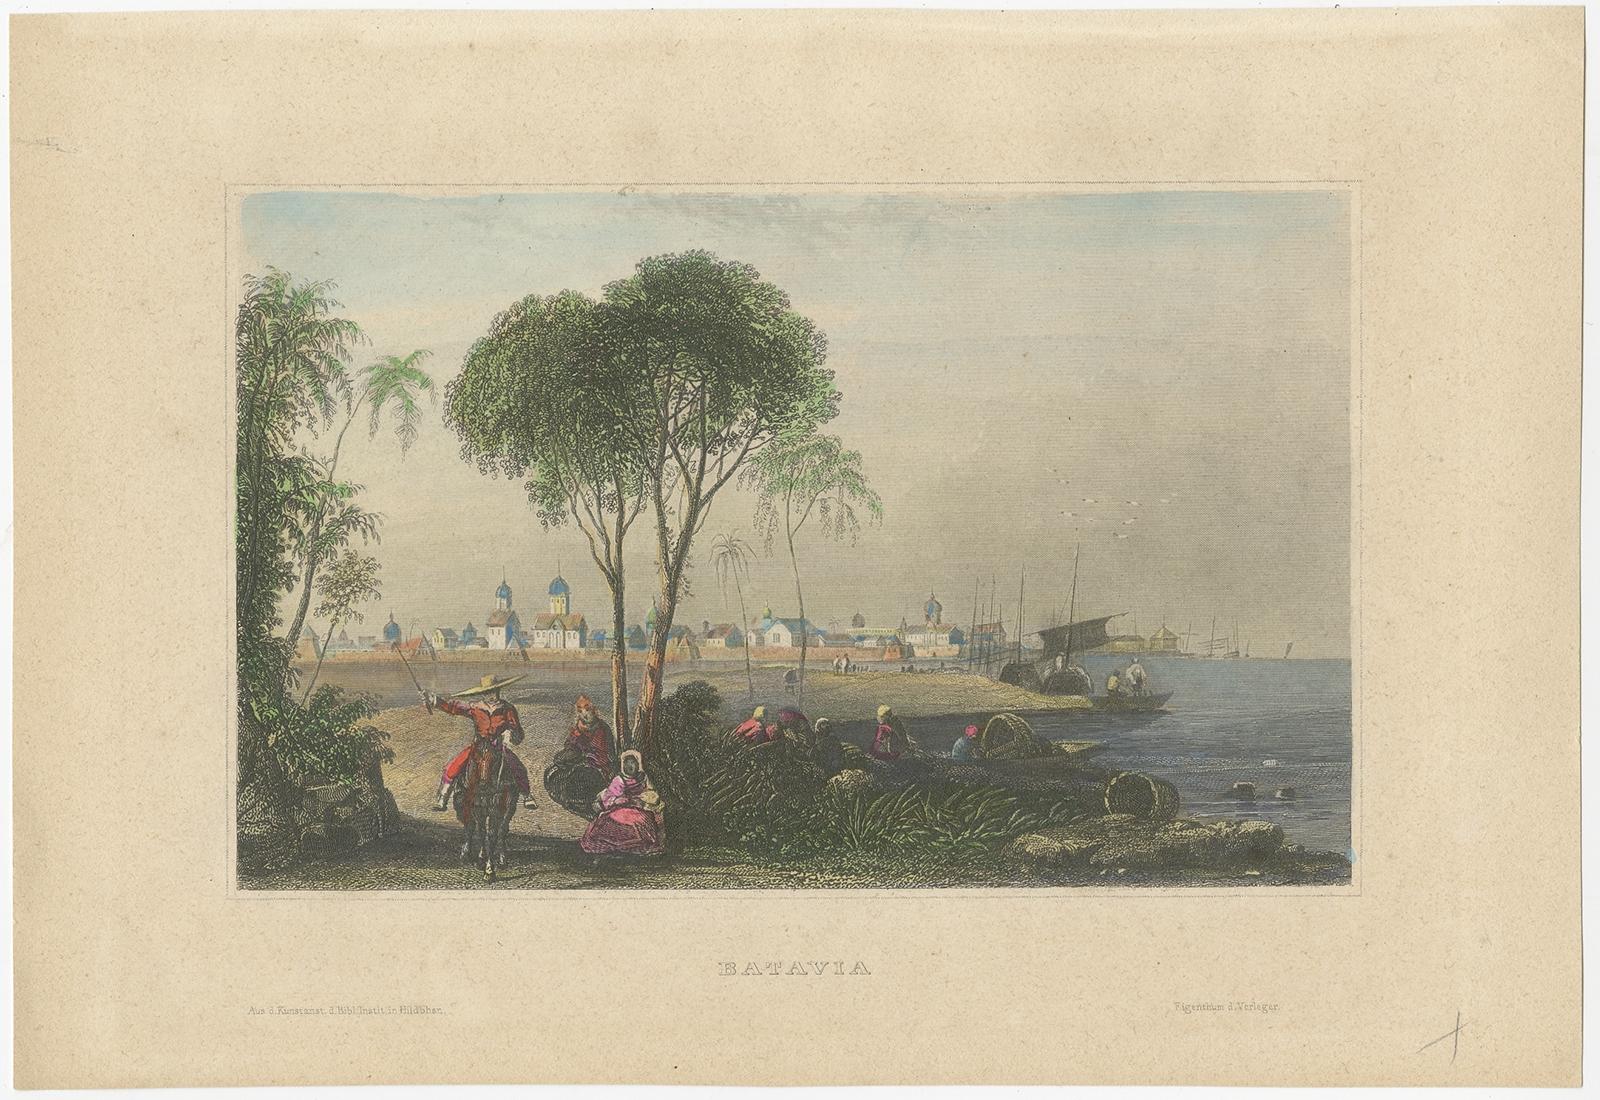 Antique print titled 'Batavia'. 

Steel engraving of Batavia (Jakarta), Indonesia. Originates from 'Meyers Universum'. 

Artists and Engravers: Joseph Meyer (May 9, 1796 - June 27, 1856) was a German industrialist and publisher, most noted for